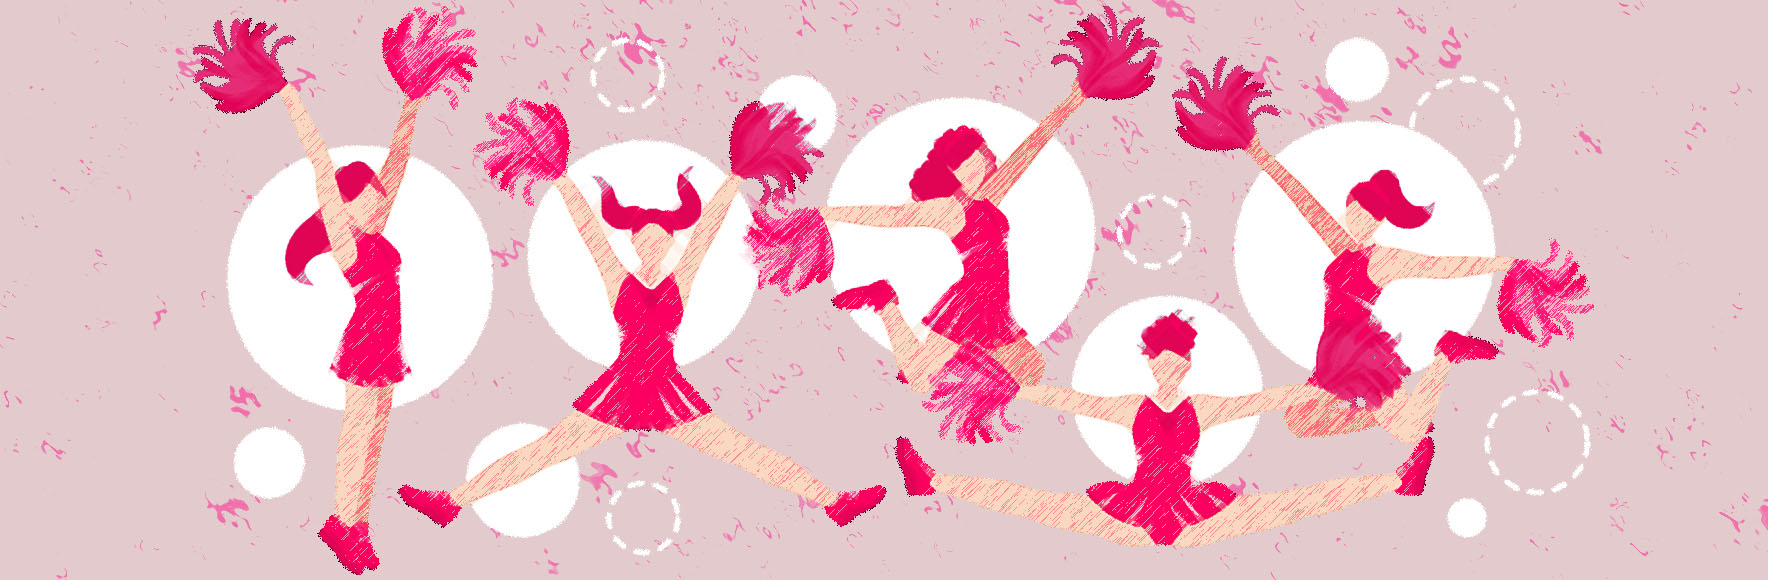 Cheer Power - Boosting Confidence, Health, and Happiness for Young Girls